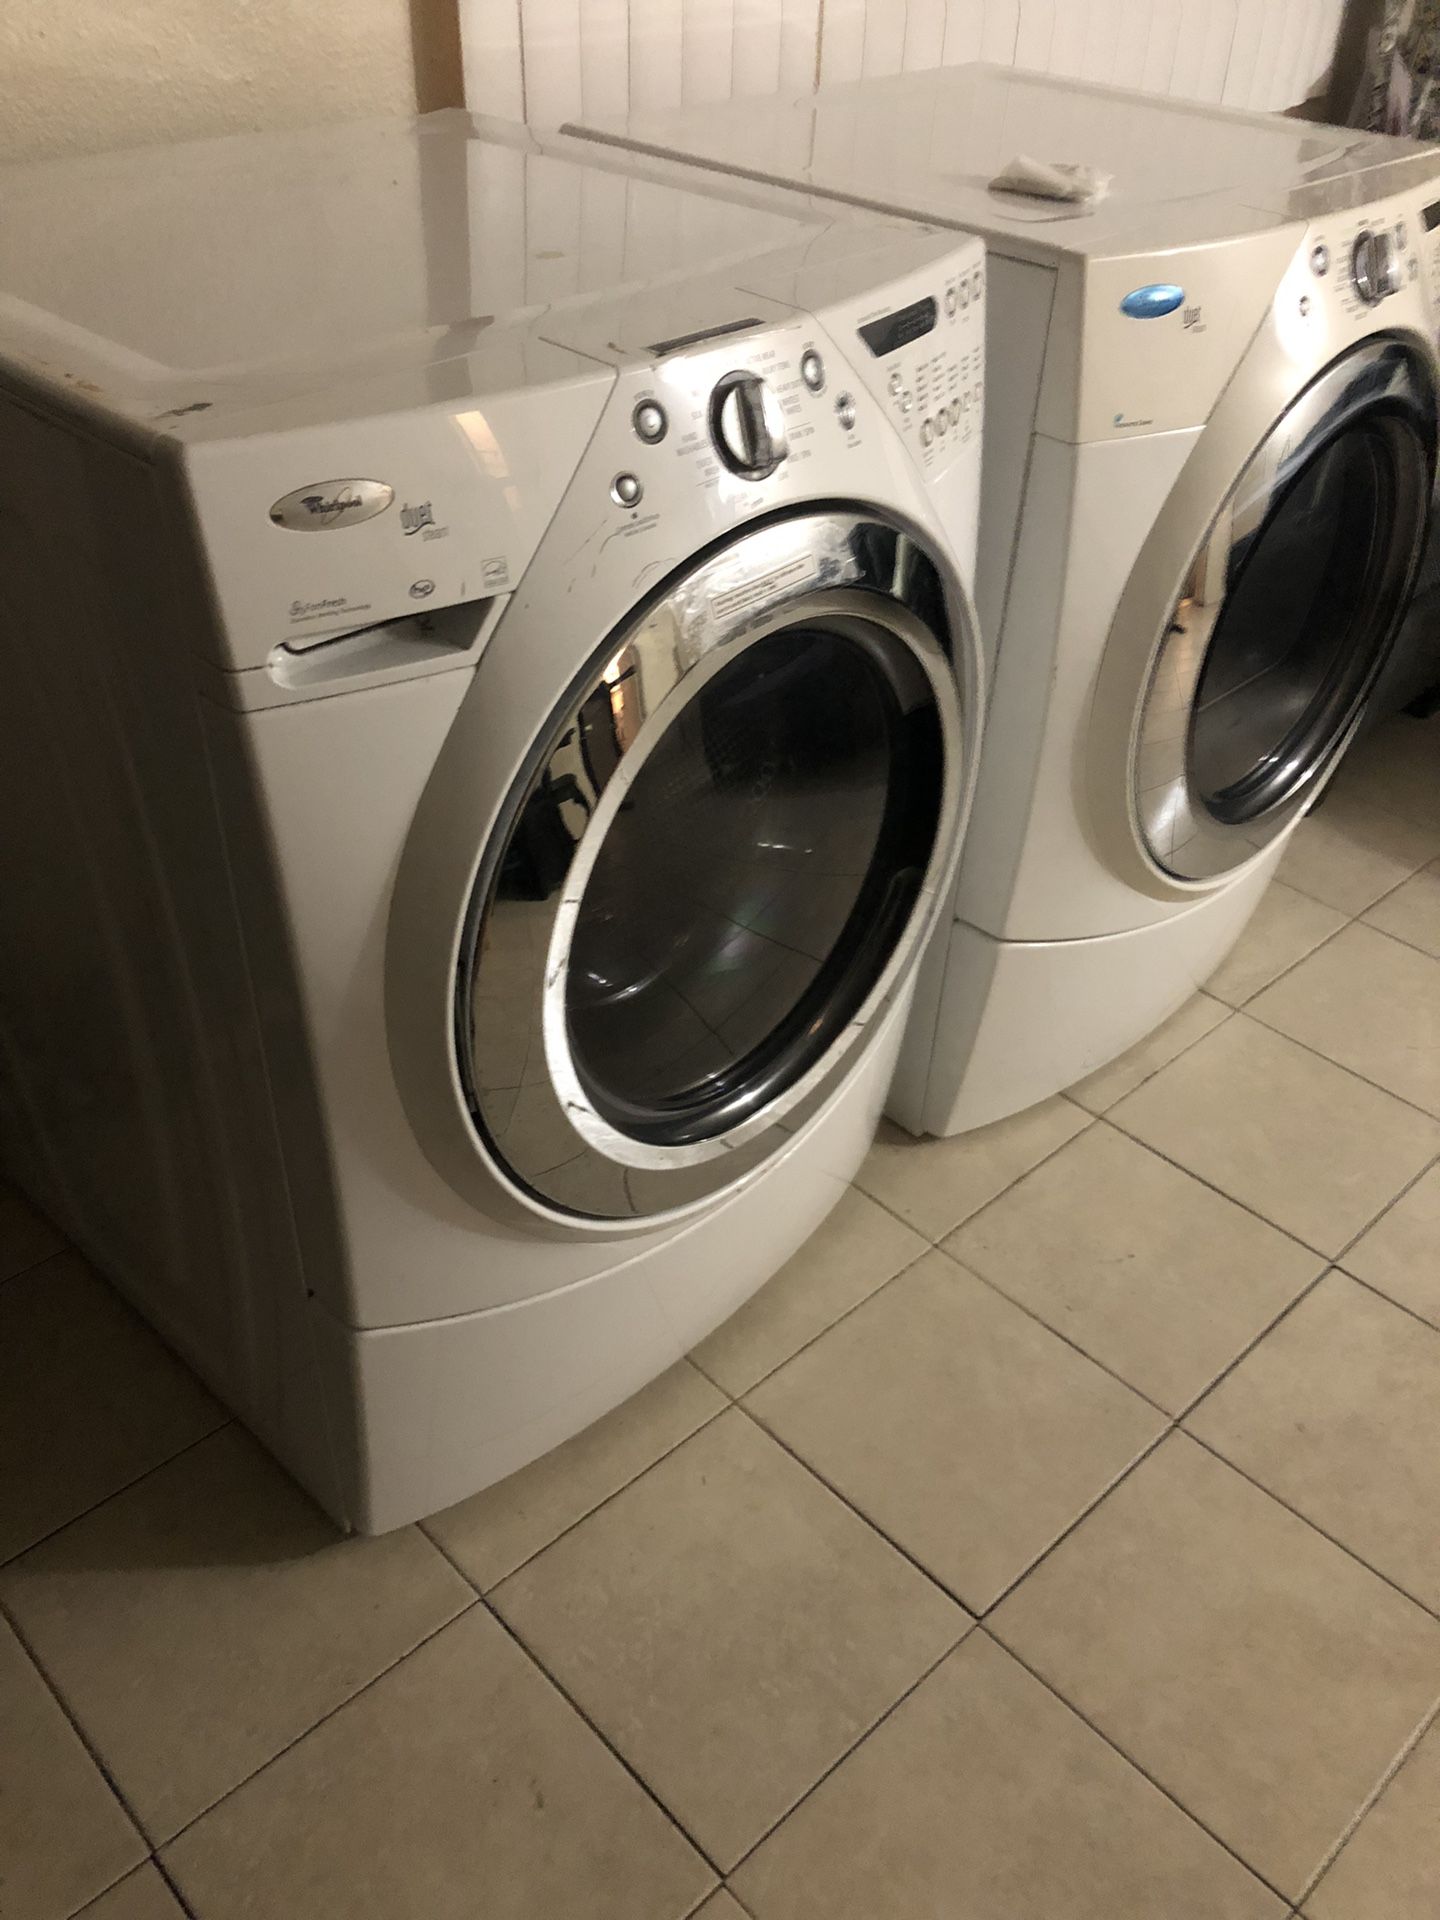 Whirlpool Washer And Dryer For Both Together 